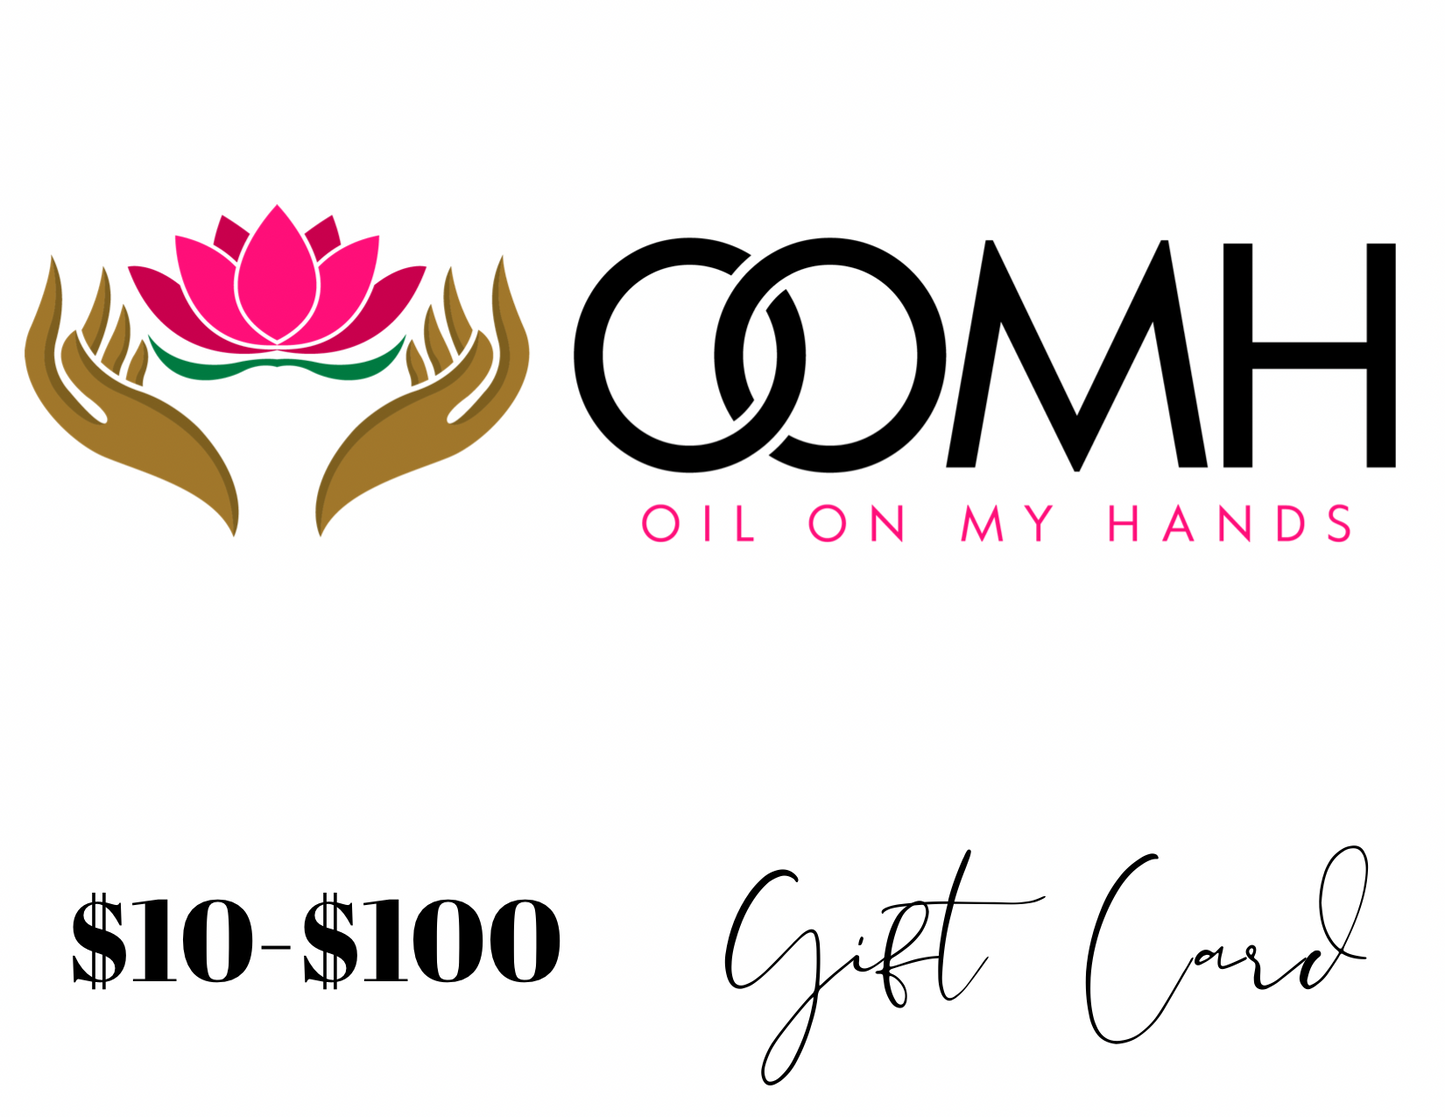 Oil On My Hands Gift Card